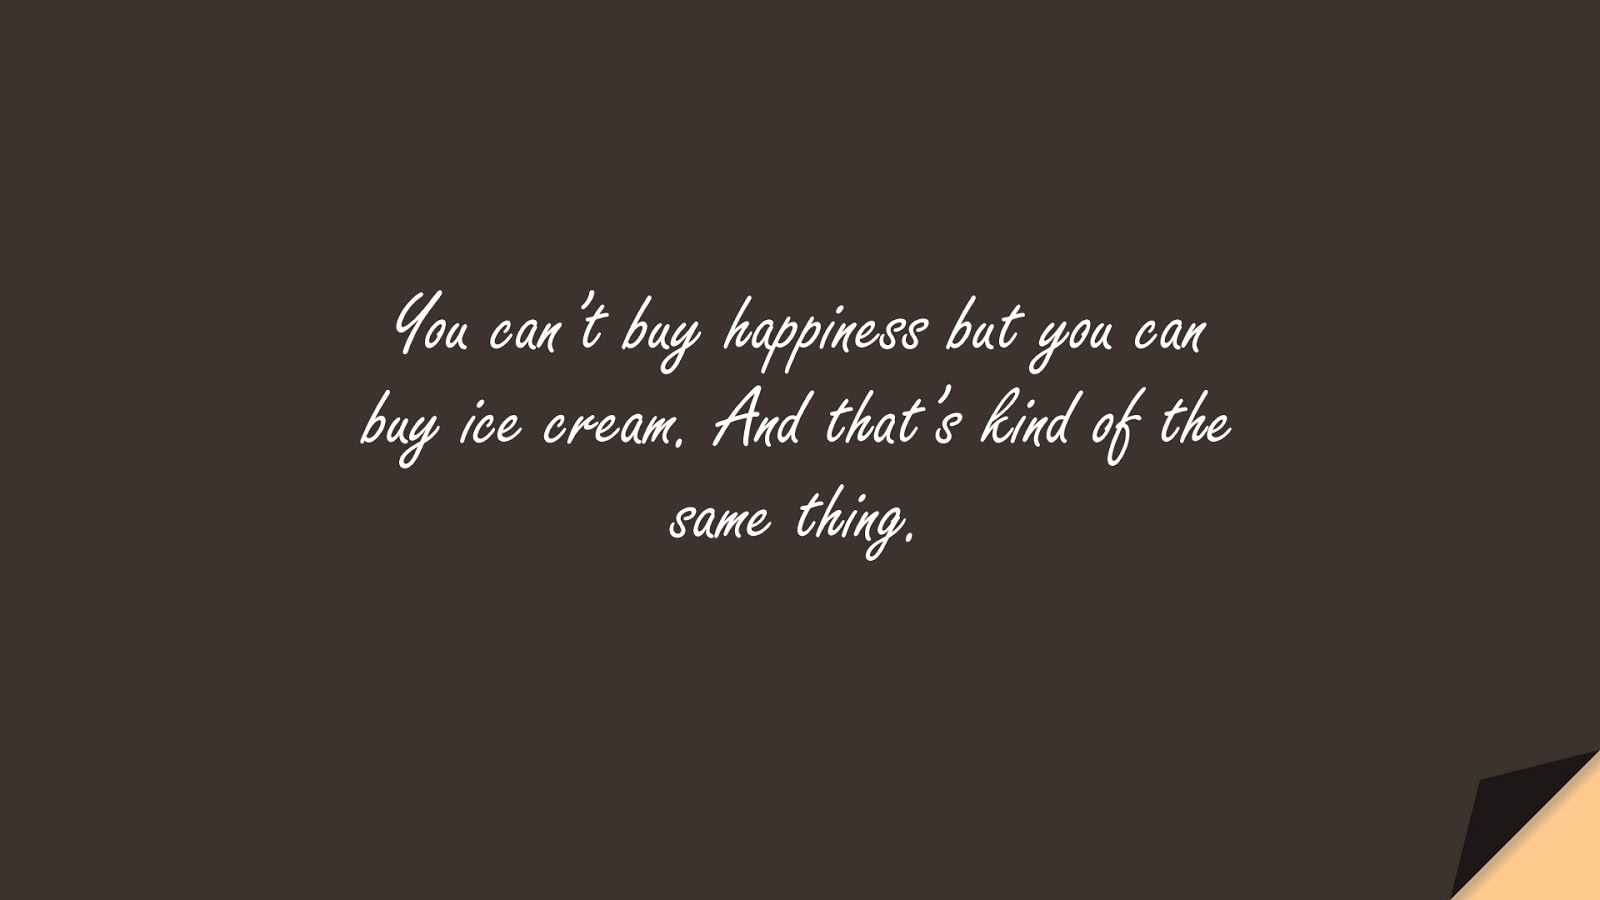 You can’t buy happiness but you can buy ice cream. And that’s kind of the same thing.FALSE